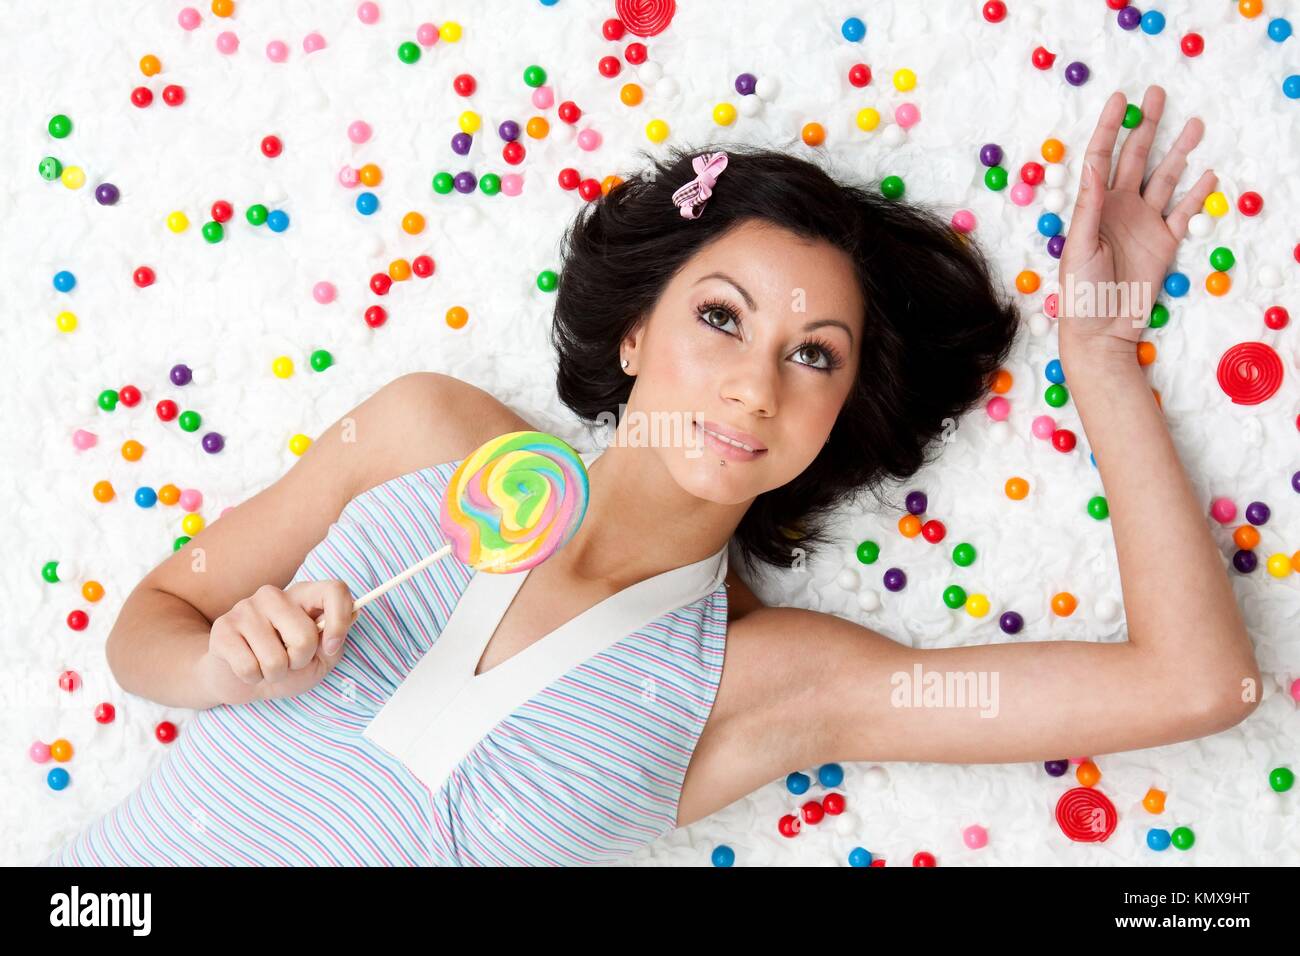 Young Latina woman laying on ruffled cloud like floor between colorful bubblegum balls holding a lollipop Stock Photo